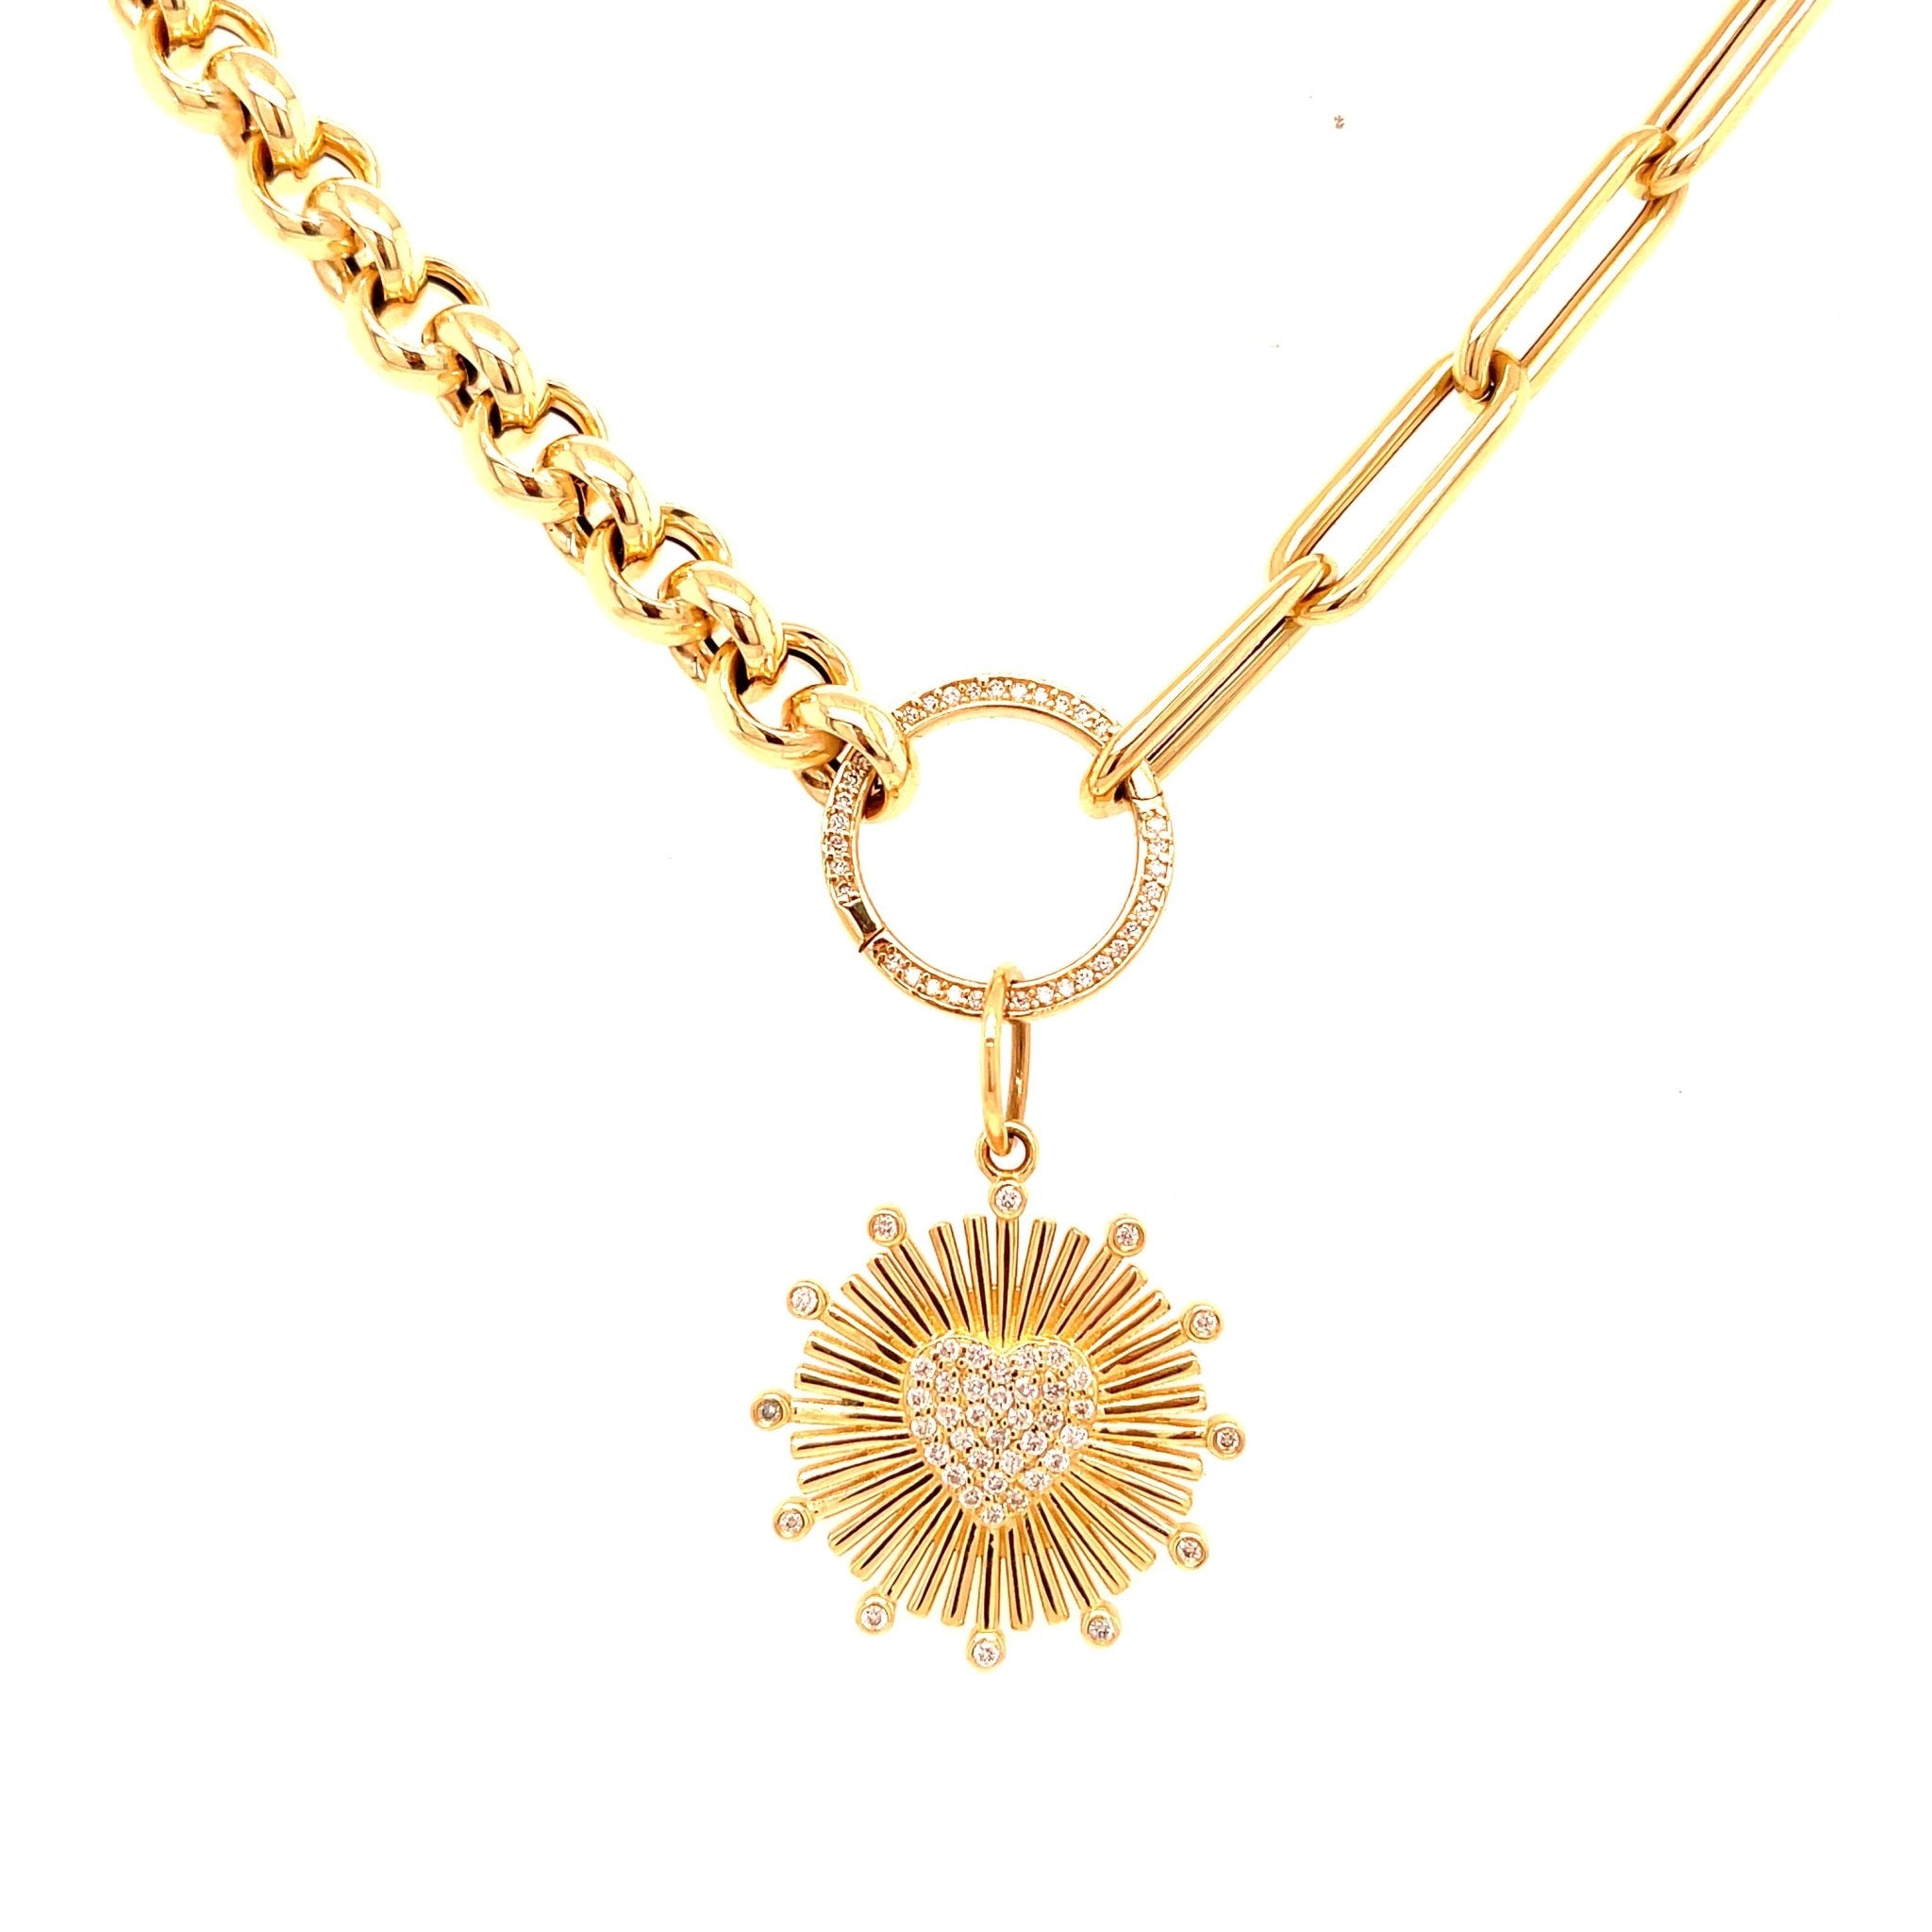 Rolo 14k Gold Charm Necklace Chain | Mejuri